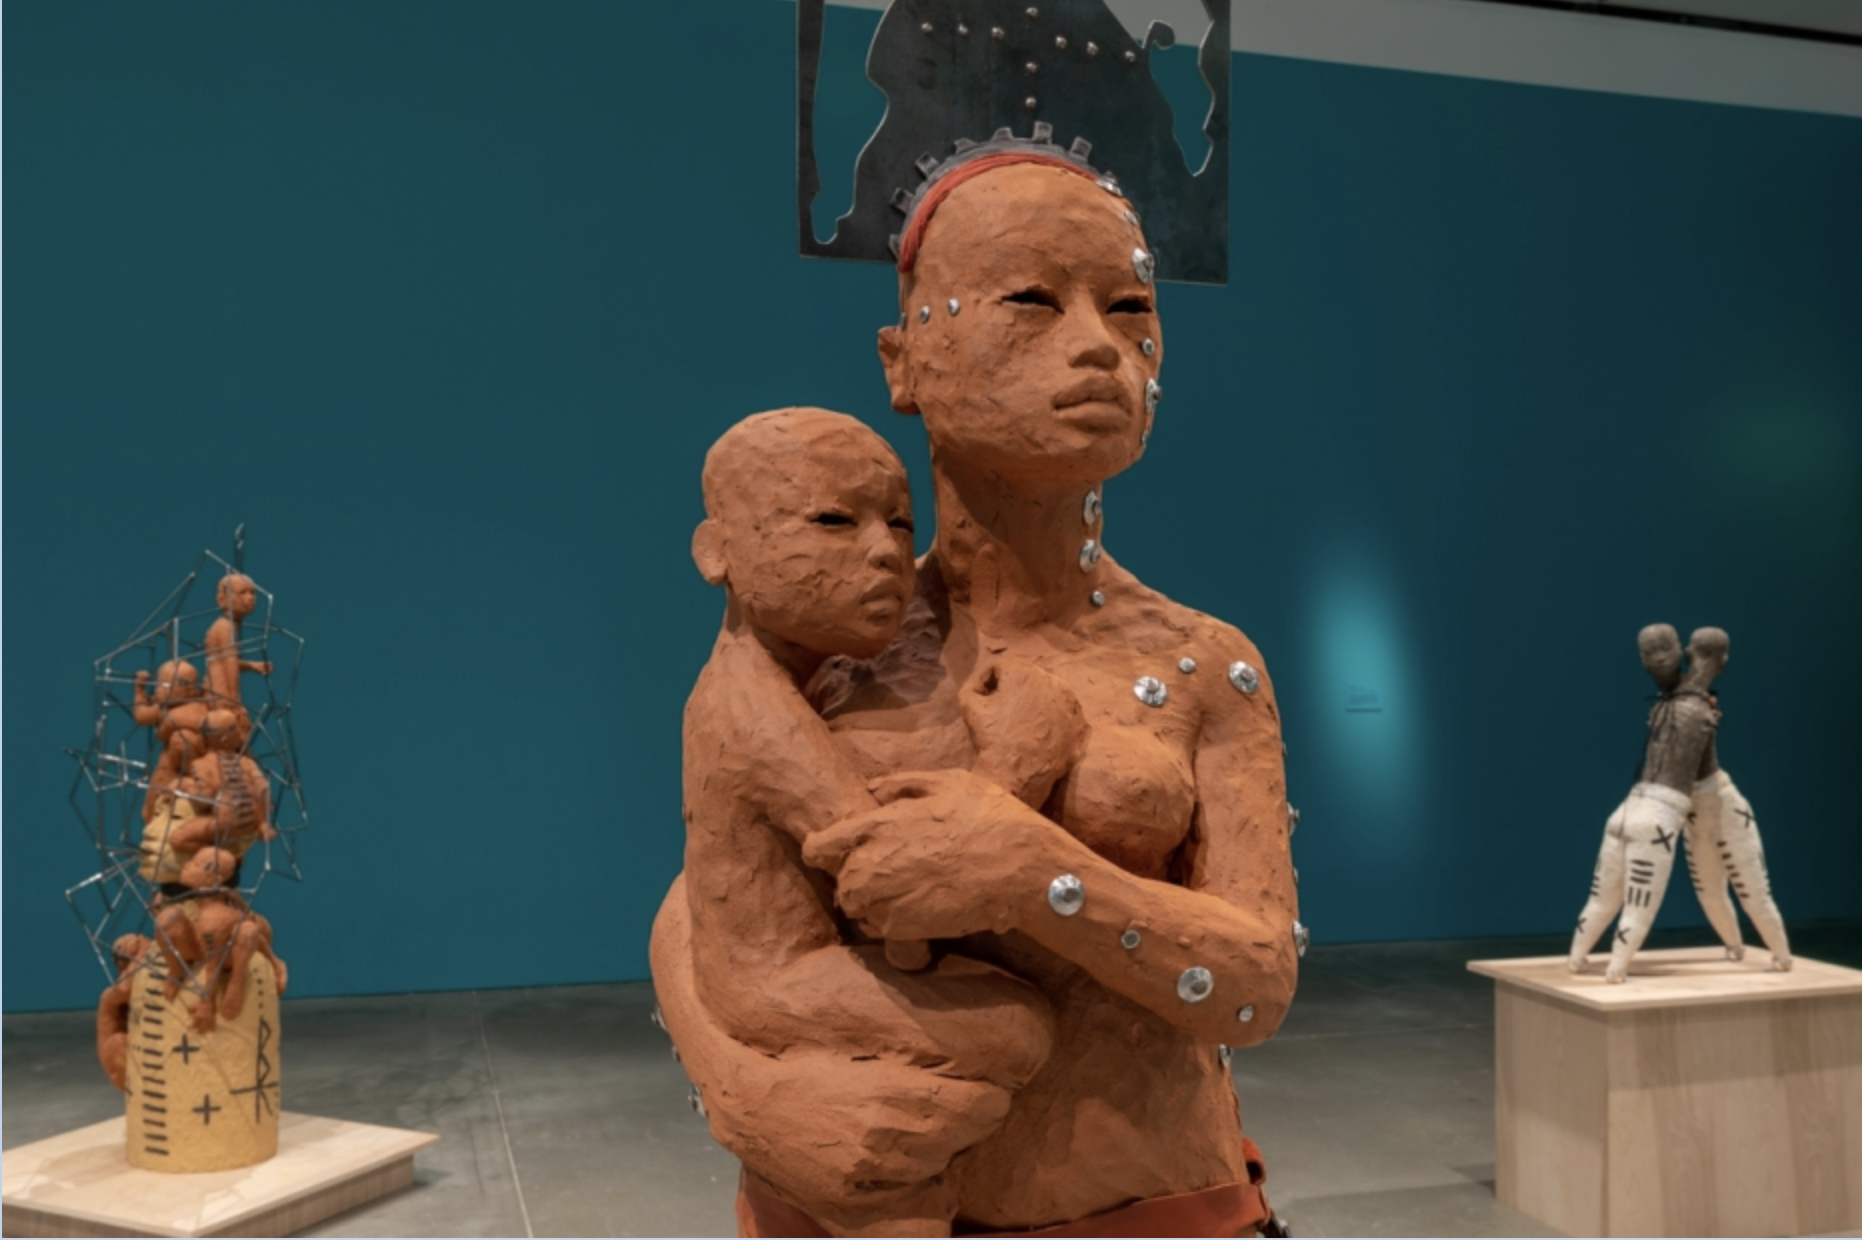 An installation view of several ceramic sculptures in a room with a blue wall. The figure in the foreground is a woman holding a baby. The two figures are made of red clay, have a rough unfinished texture, and are bedazzled with round metal pieces.